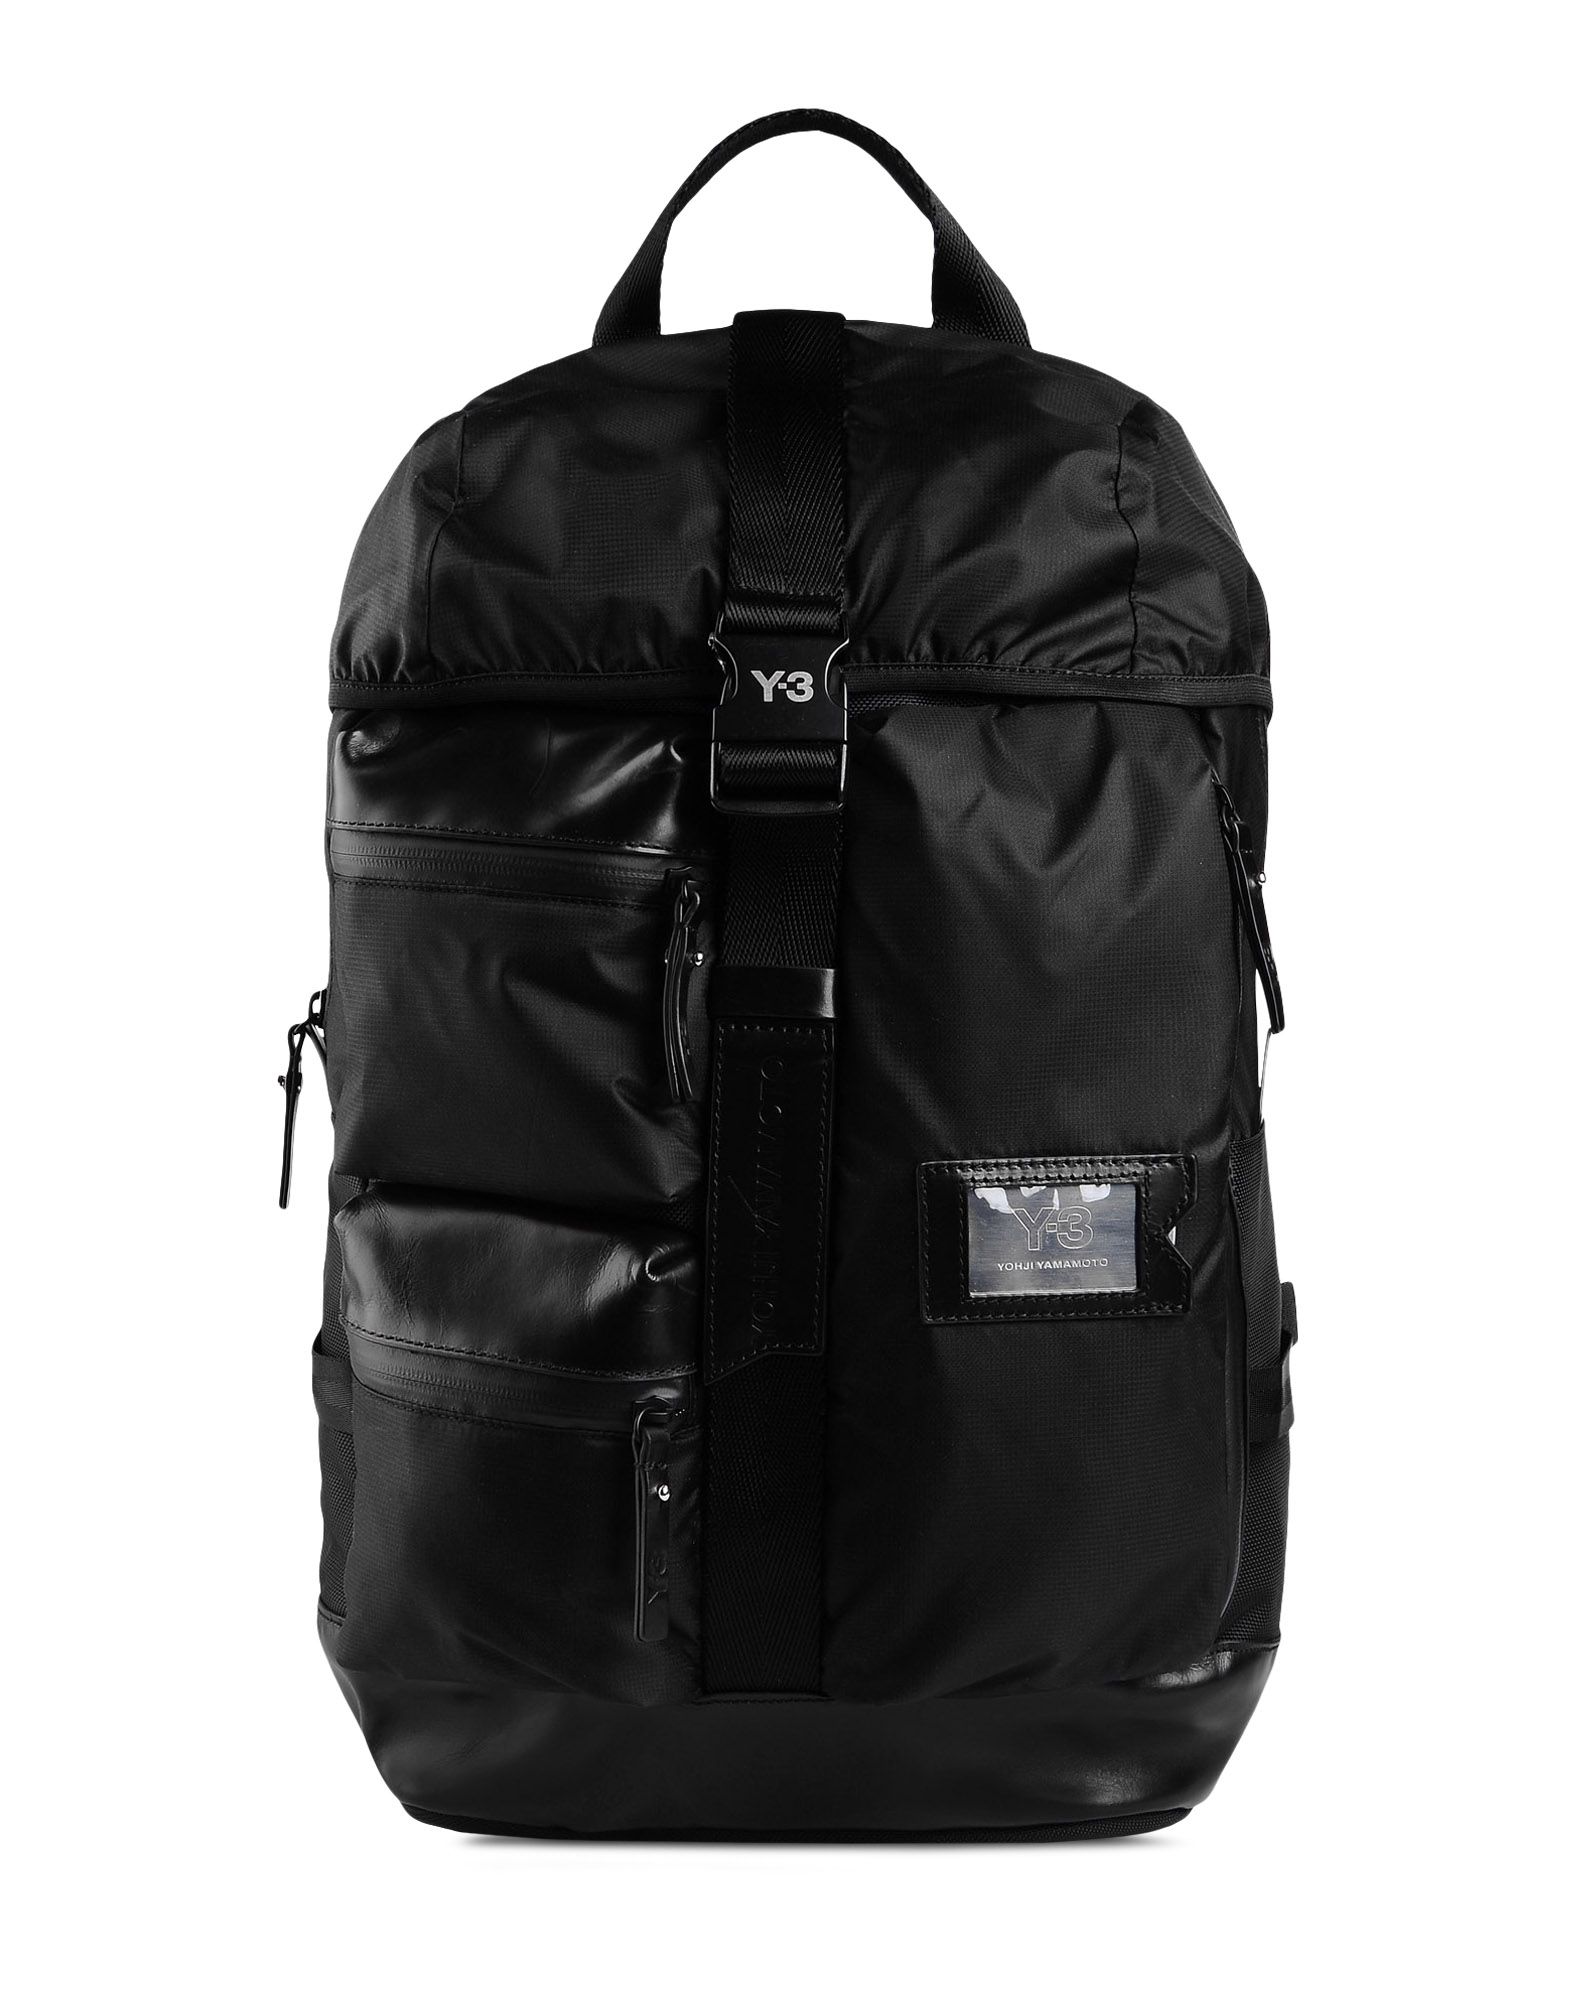 Y 3 Mobility Backpack ‎ ‎Backpacks‎ ‎ ‎ | Adidas Y-3 Official Site